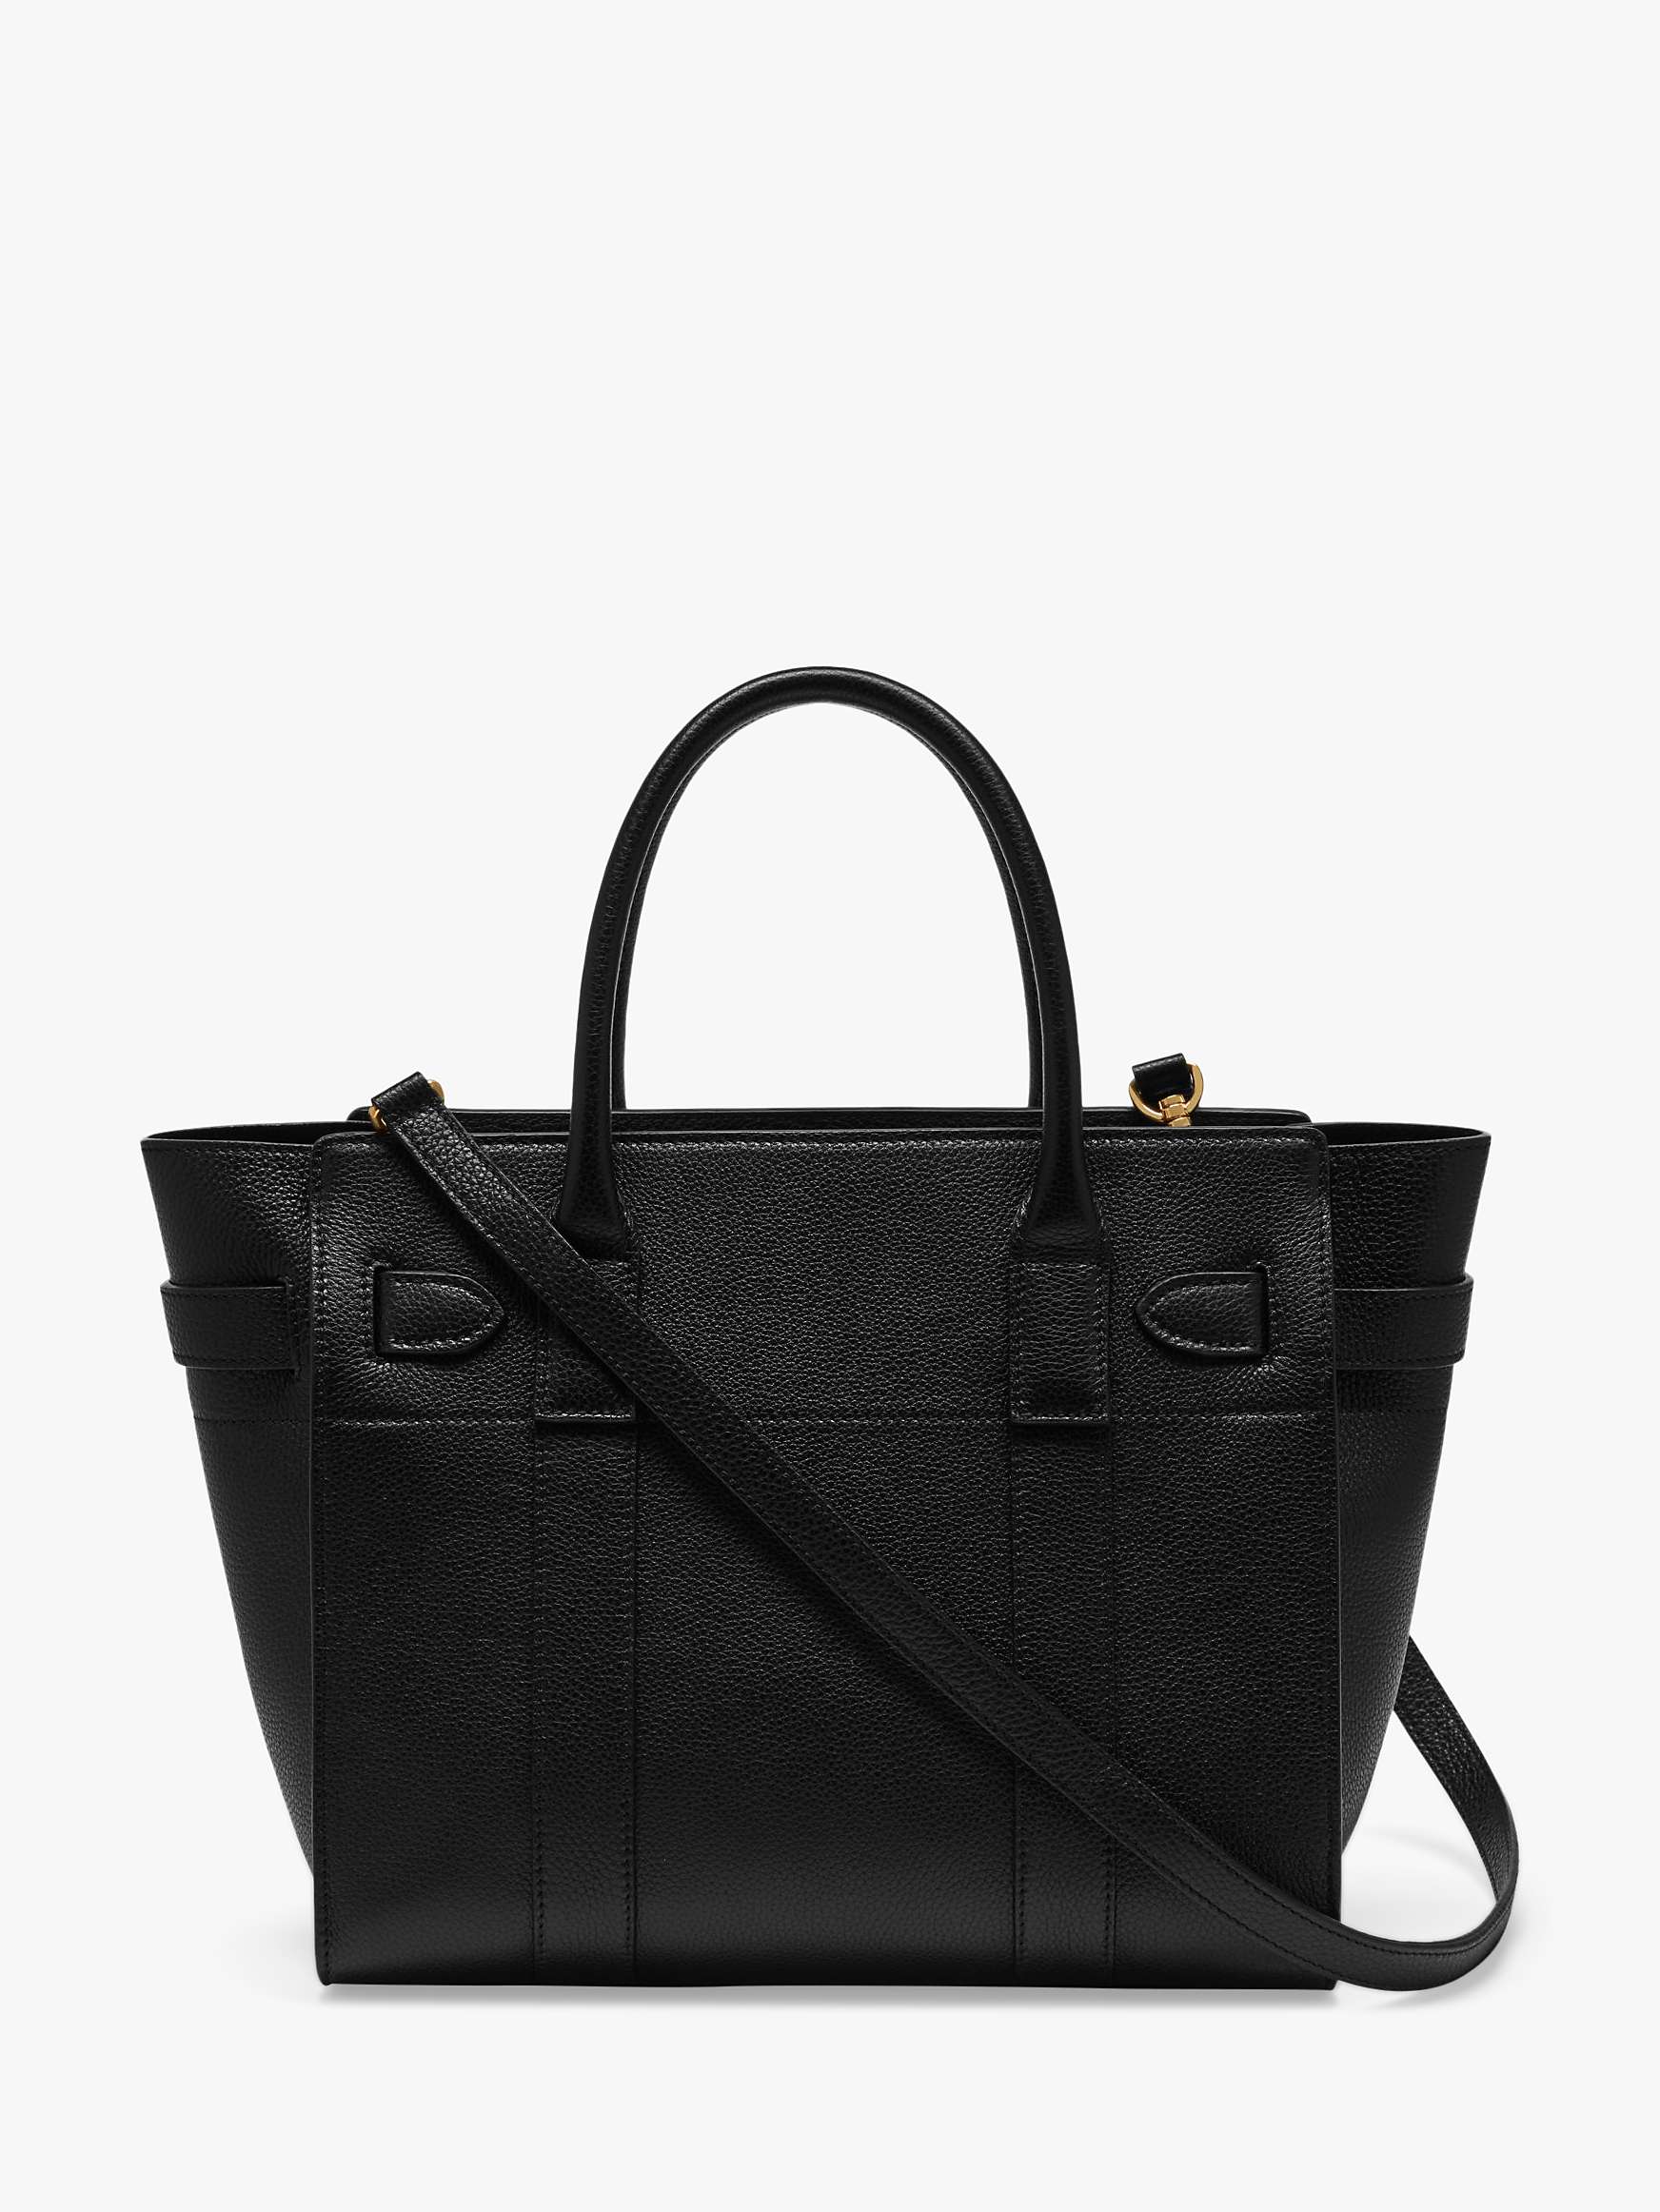 Buy Mulberry Small Bayswater Zipped Classic Grain Leather Tote Bag Online at johnlewis.com